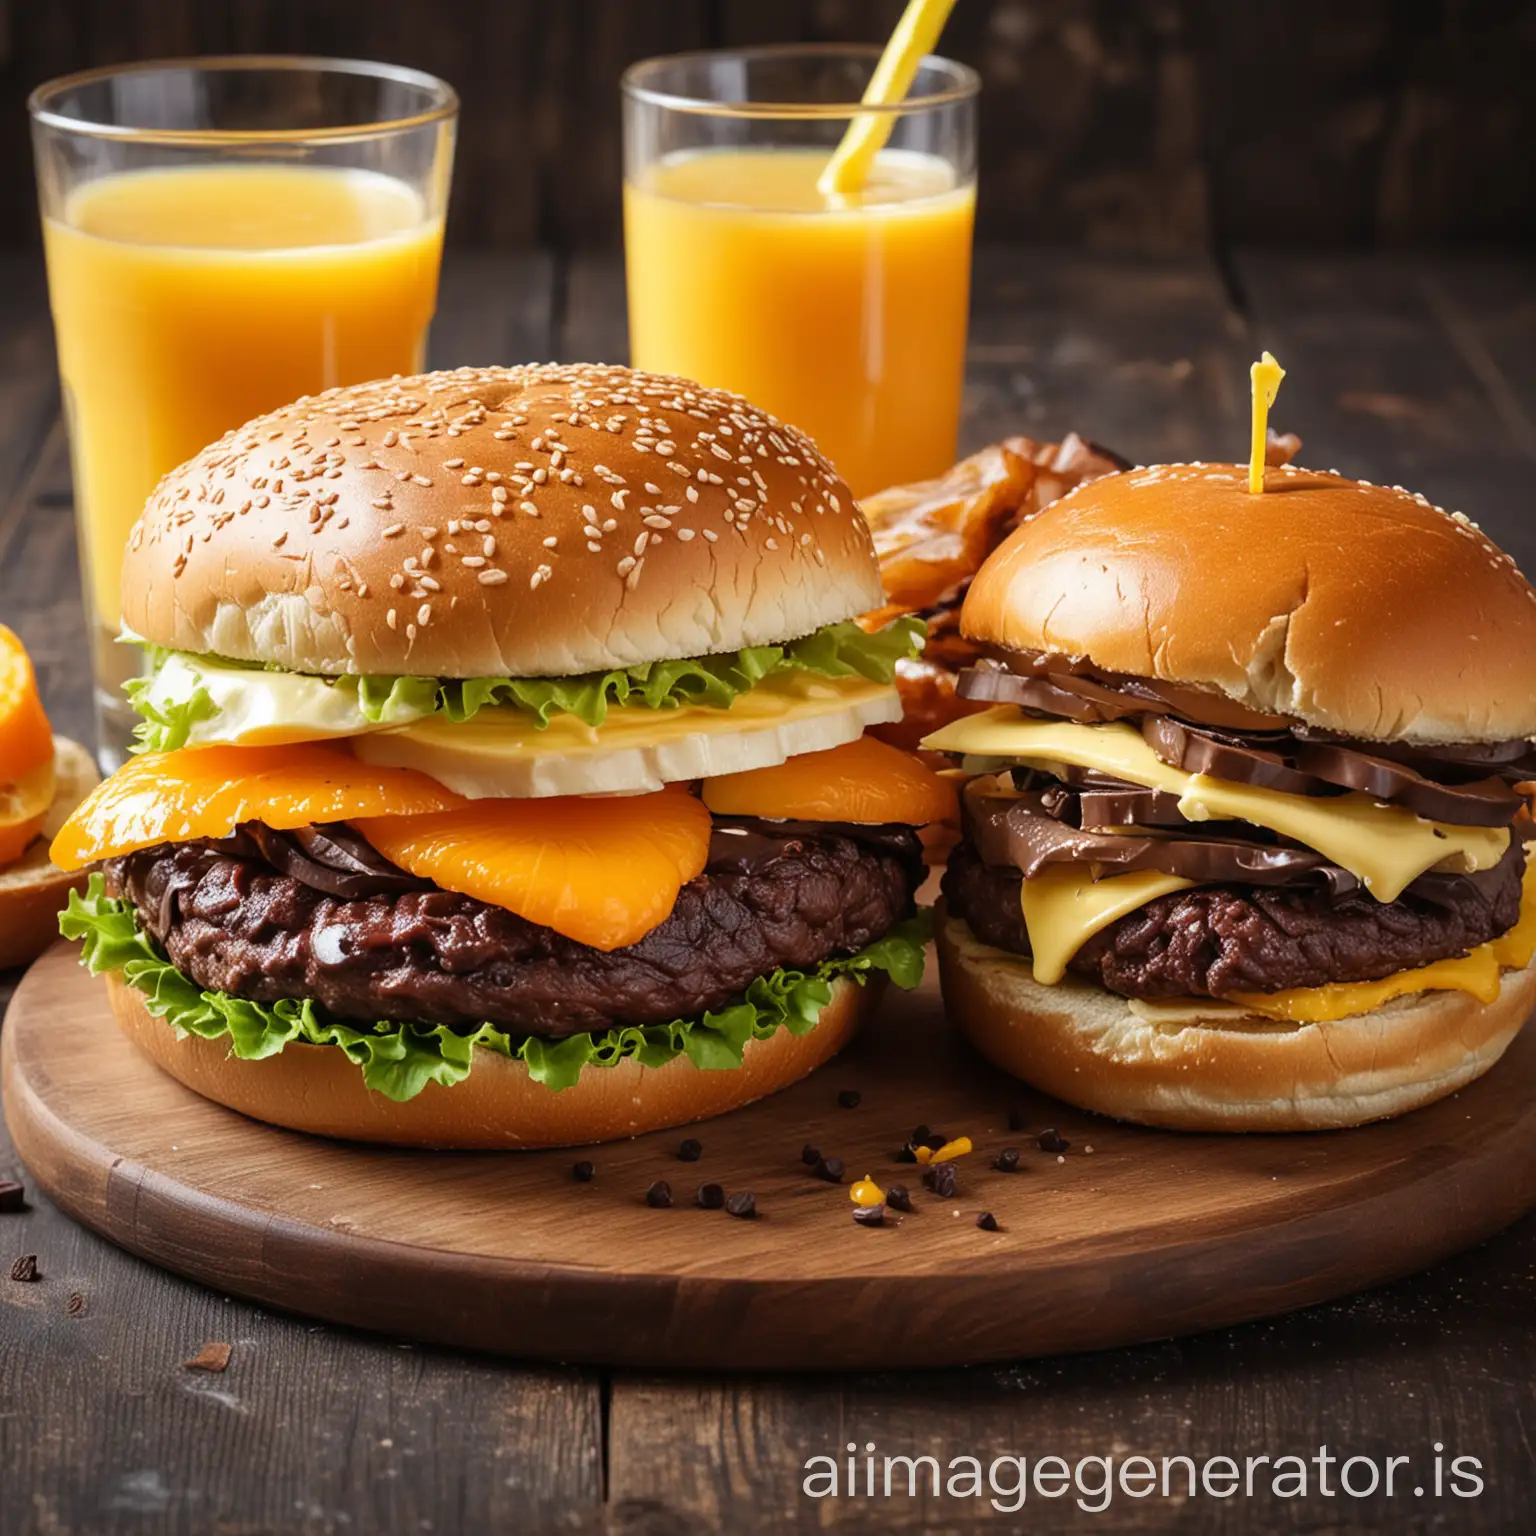 Delectable-Sandwich-and-Hamburger-Feast-with-Chocolate-Butter-and-Refreshing-Orange-Juice